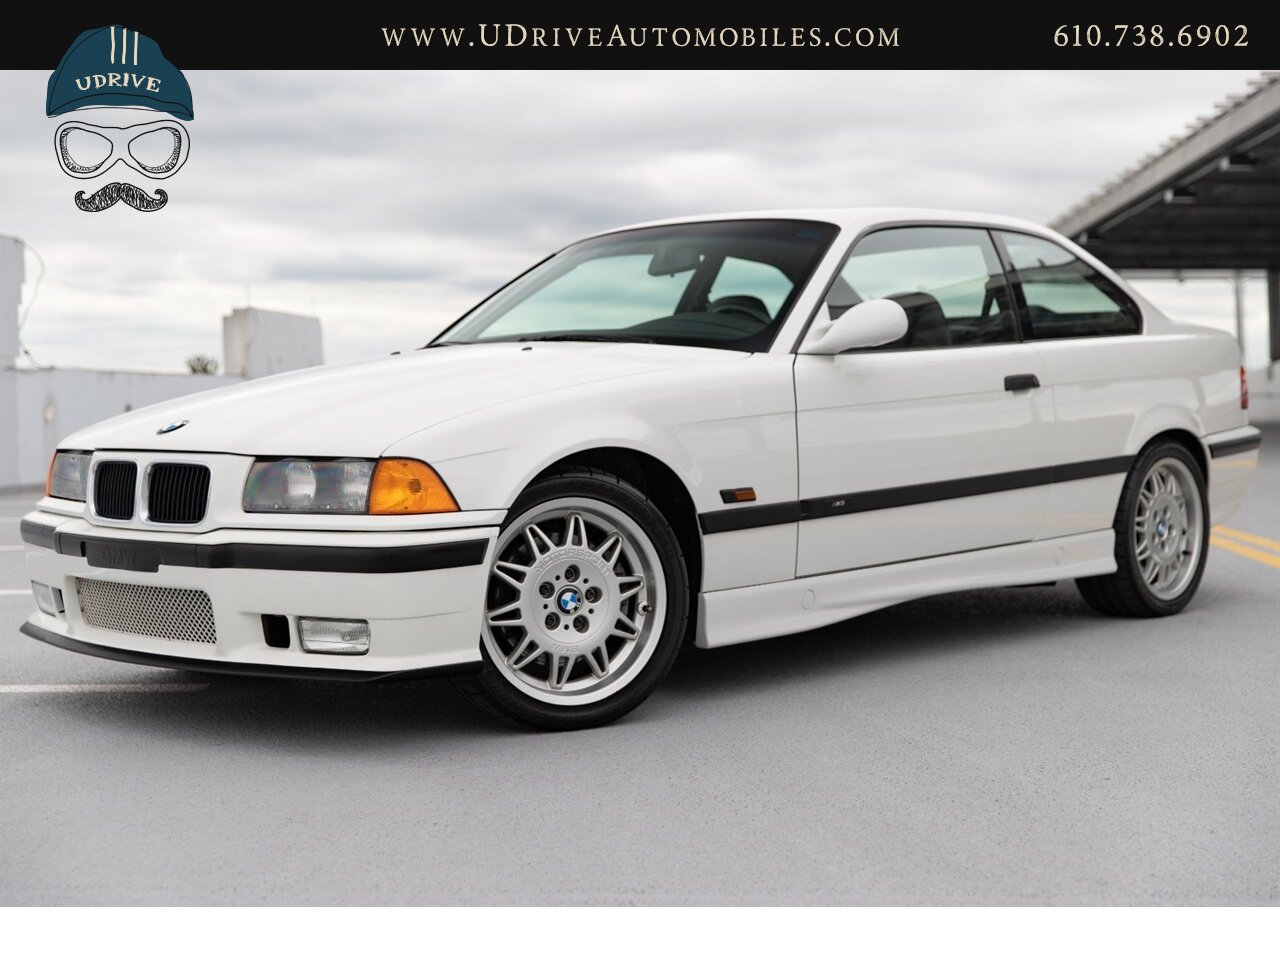 Paul Walker's E36 BMW M3 just sold for £300,000